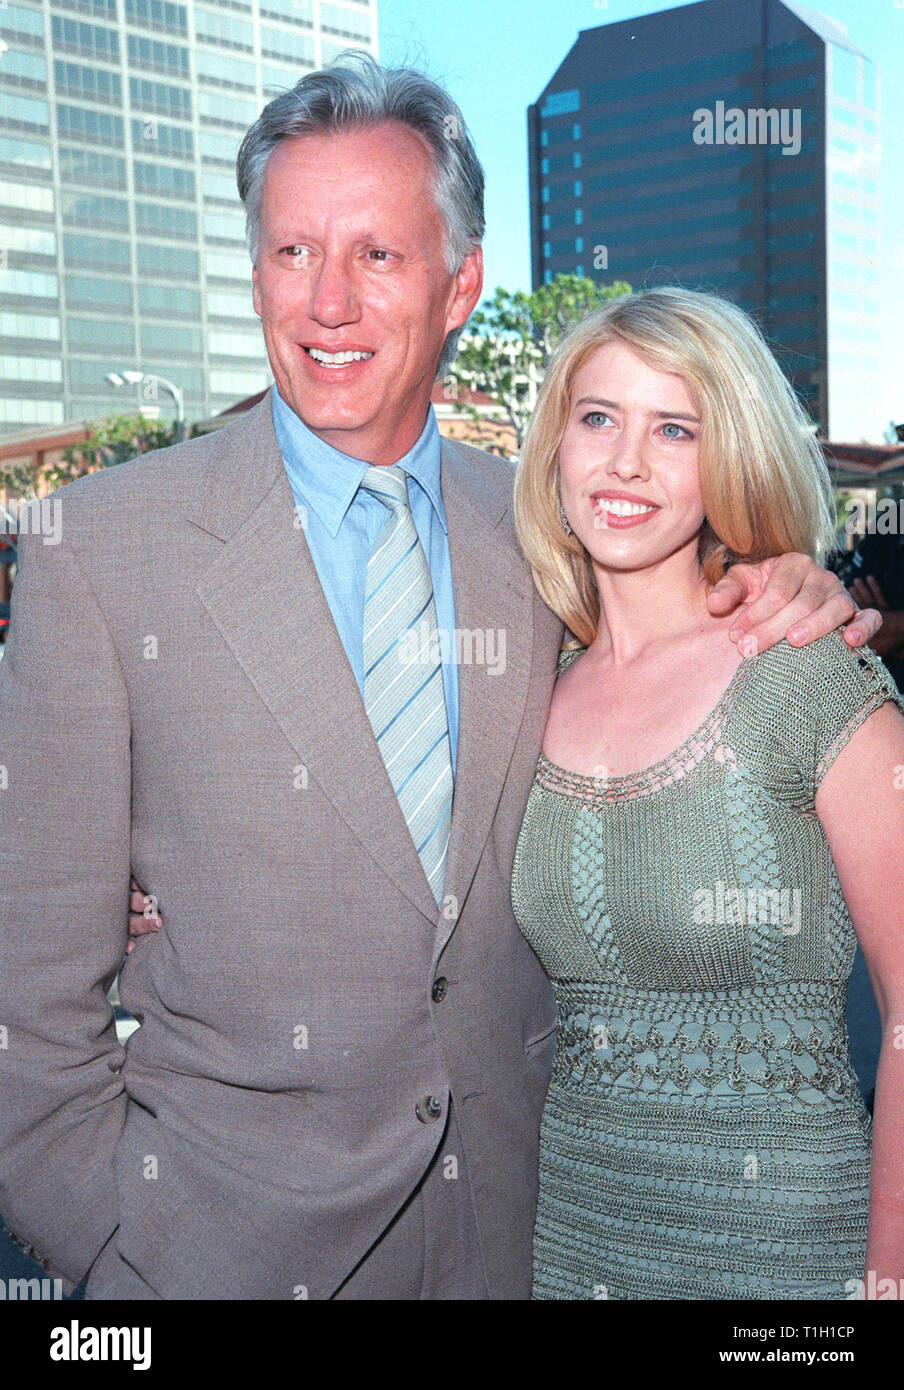 LOS ANGELES, CA. June 15, 1999:  Actor JAMES WOODS & girlfriend DAWN DeNOON at the world premiere, in Los Angeles, of his new movie 'The General's Daughter' in which he stars with John Travolta. © Paul Smith / Featureflash Stock Photo